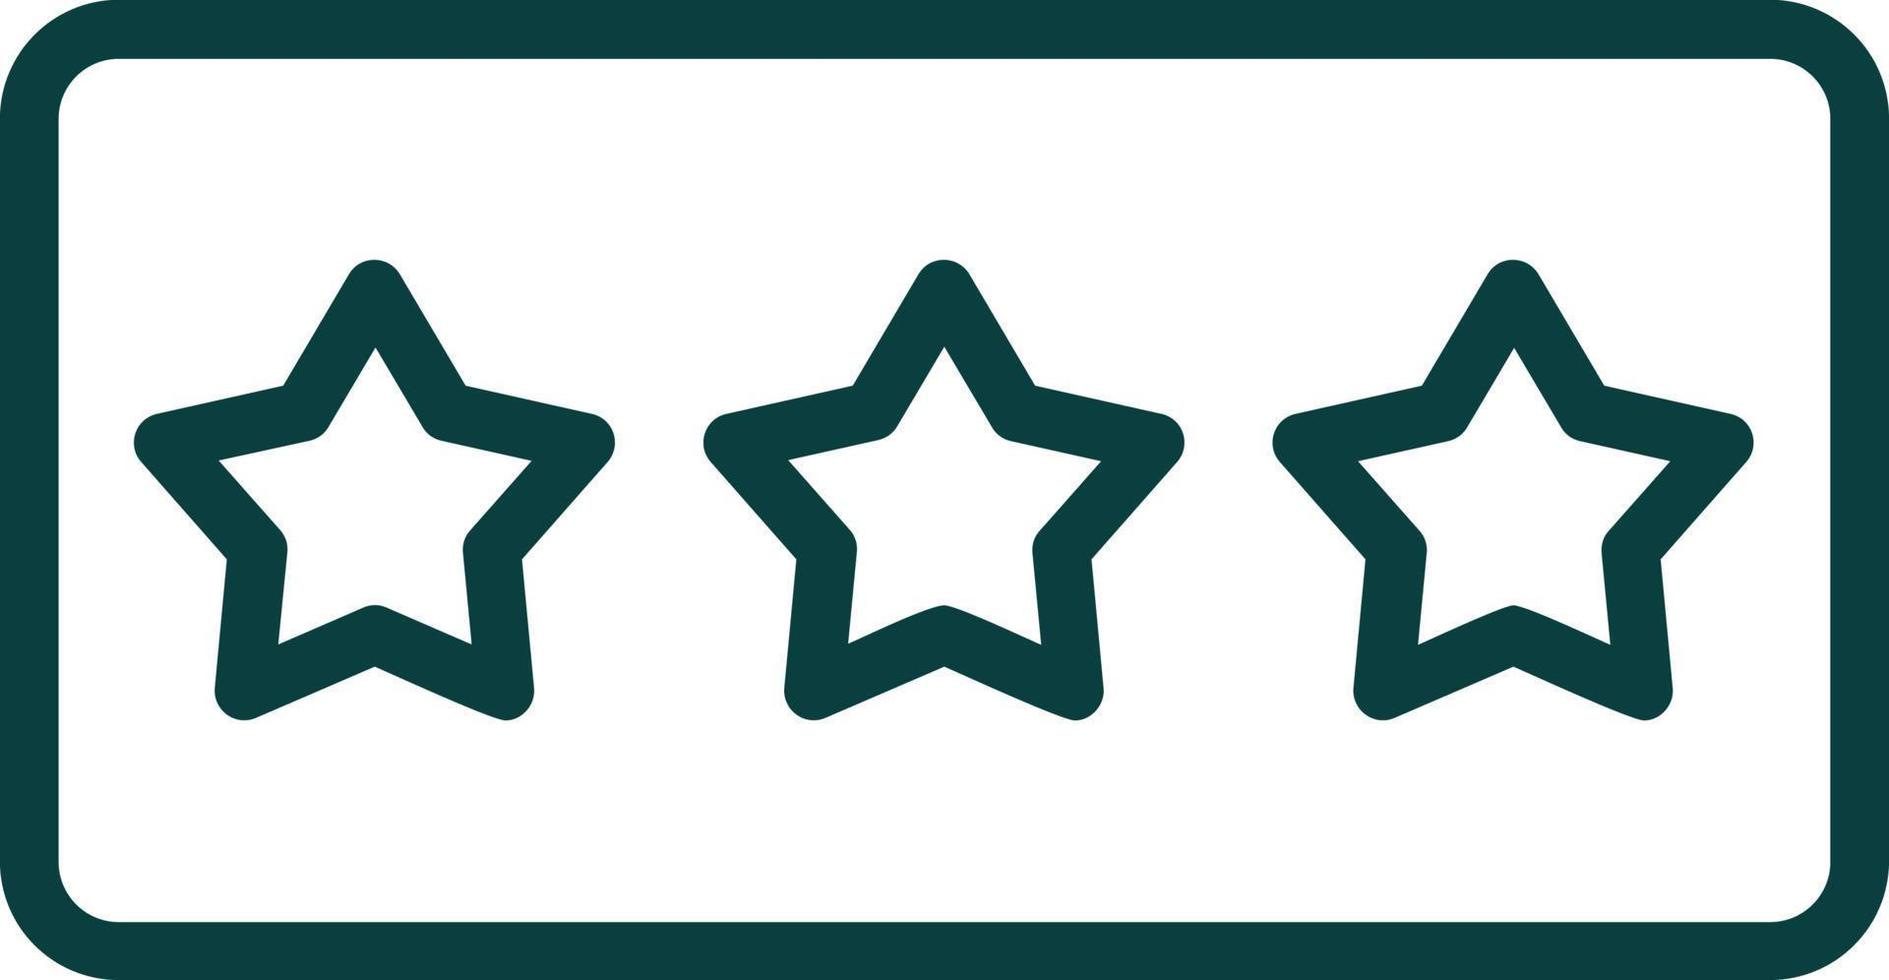 Star Rating Vector Icon Design